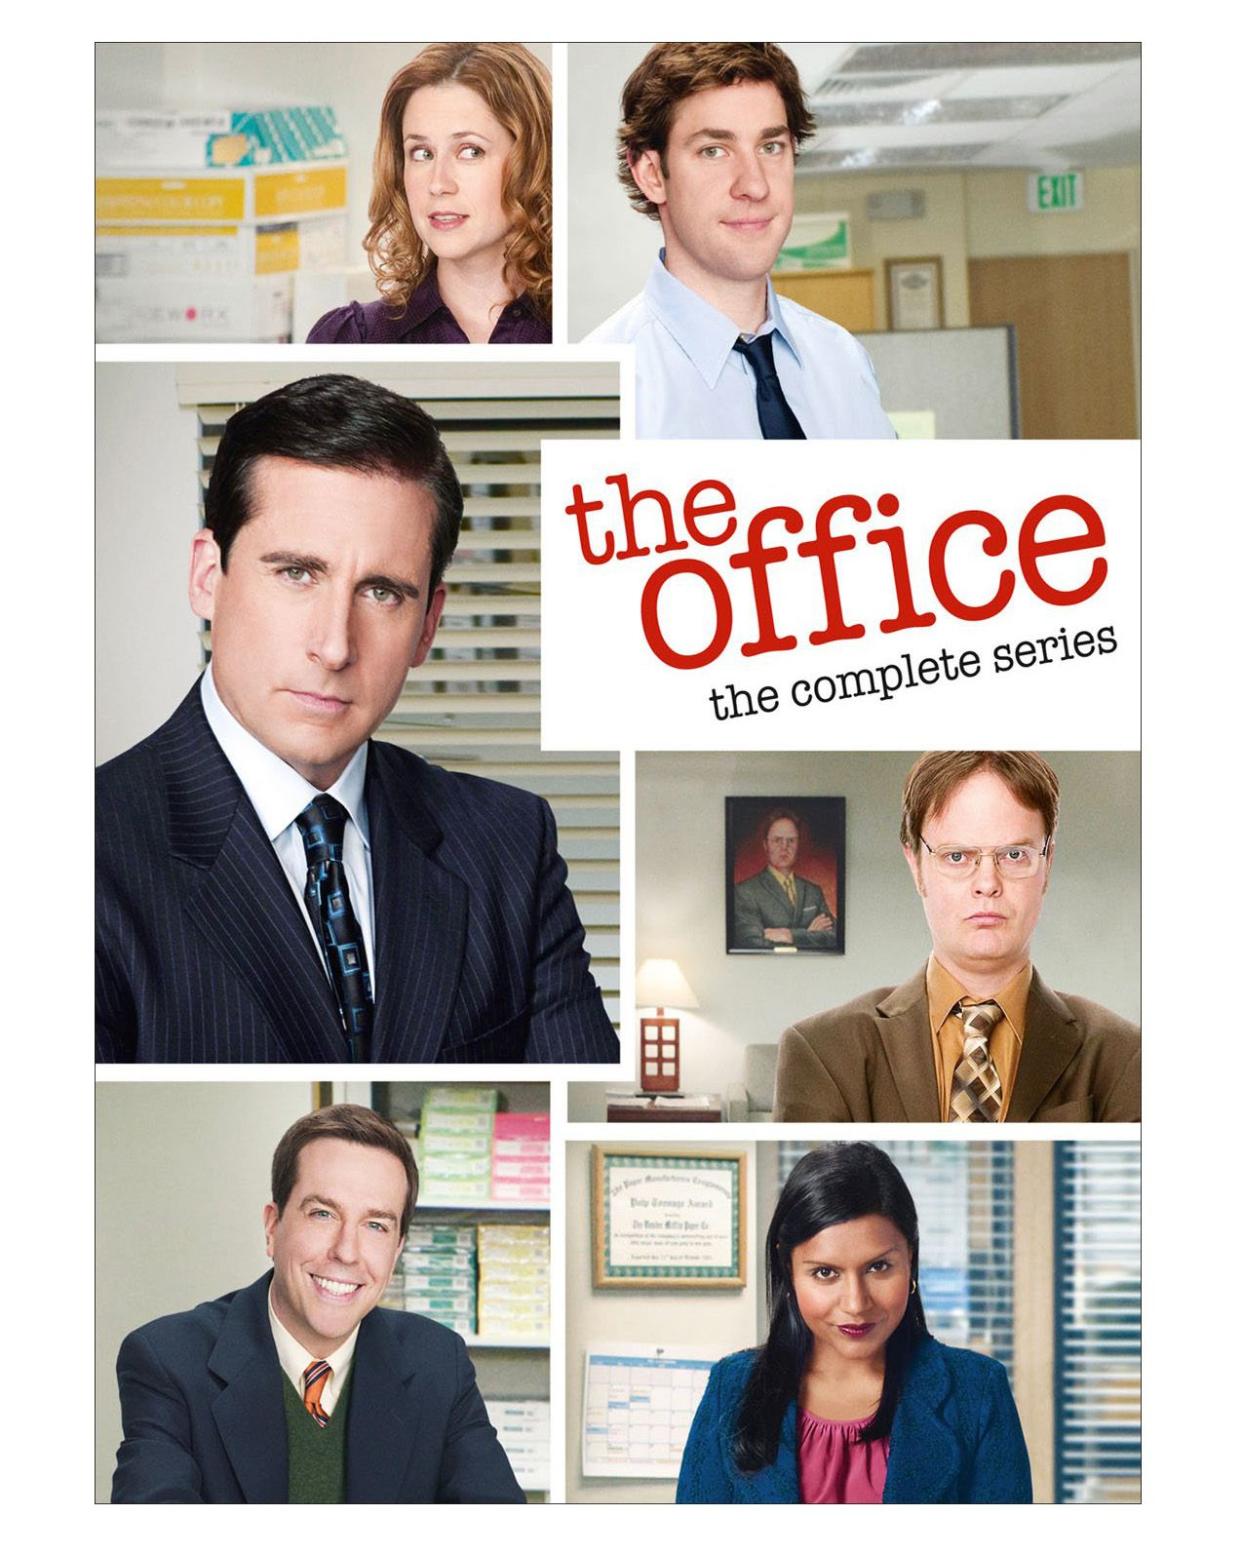 'the office': the complete series